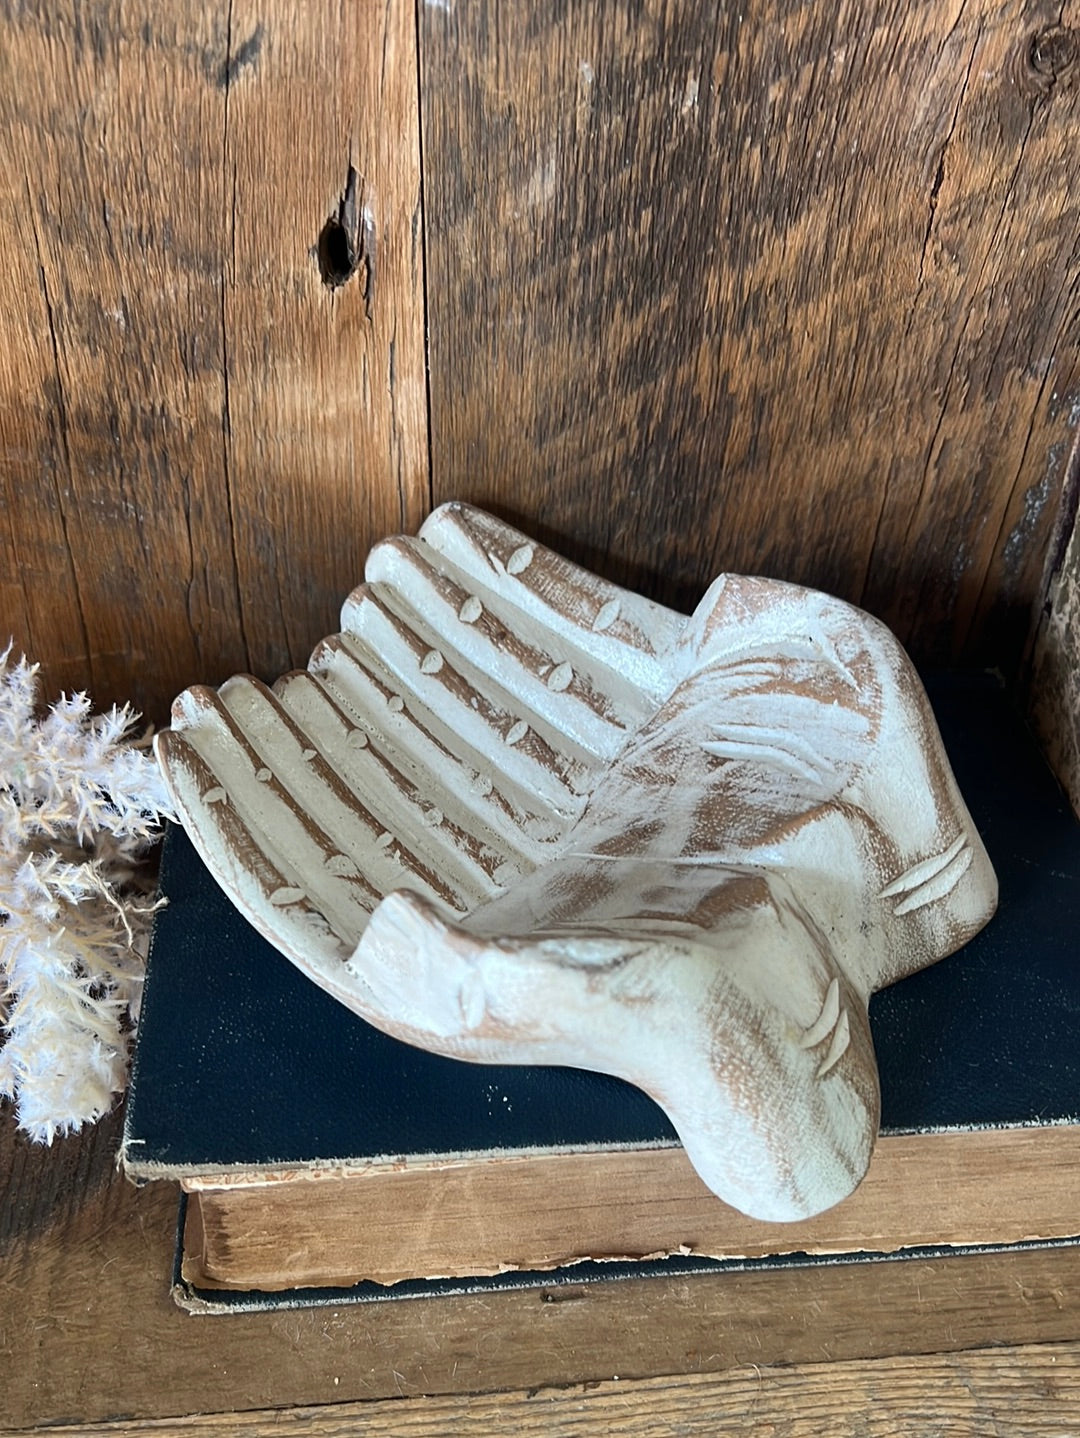 Open Hands Wooden Offering Bowl Whitewashed